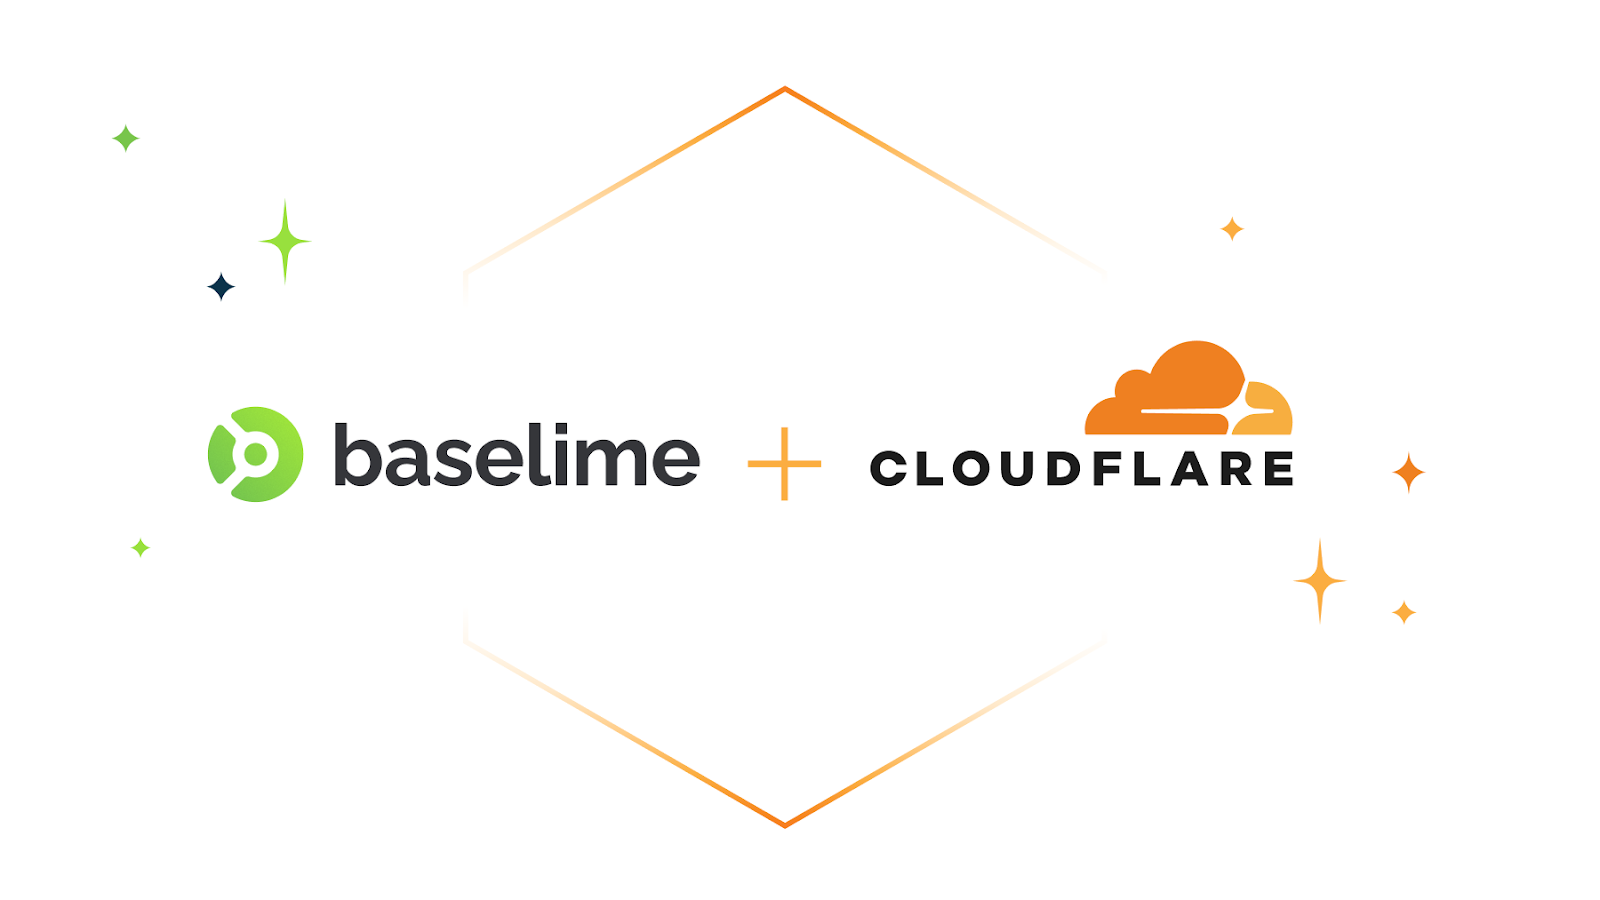 Cloudflare acquires Baselime to expand serverless application observability capabilities